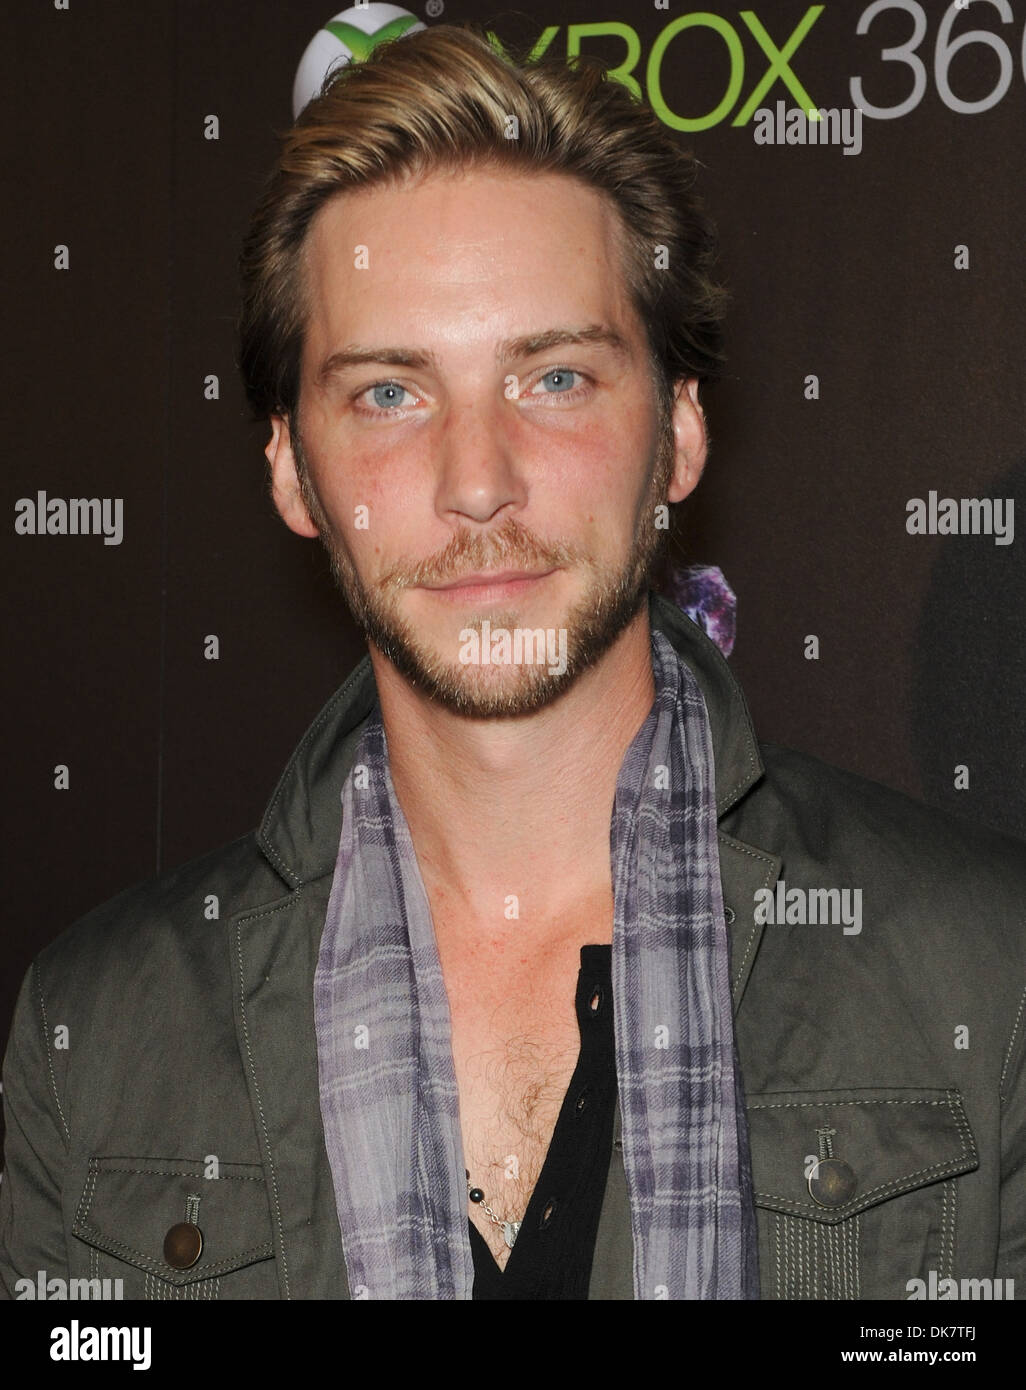 Famous Voice Over, Troy Baker